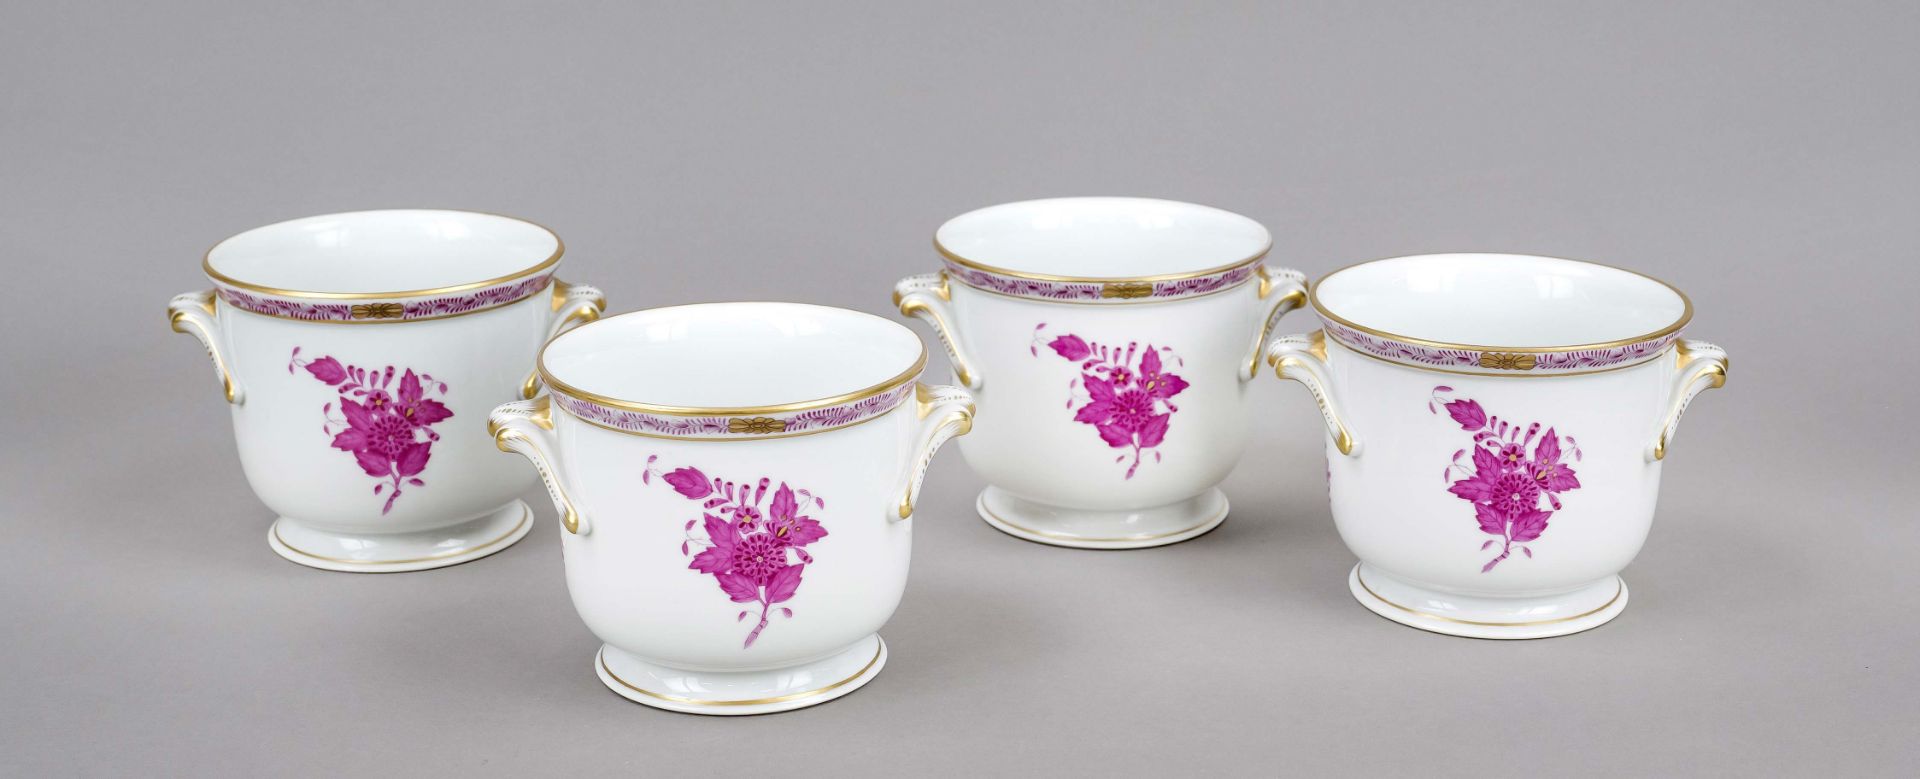 Four cachepots, Herend, 2nd half of the 20th century, Apponyi decoration in purple, gold staffage,